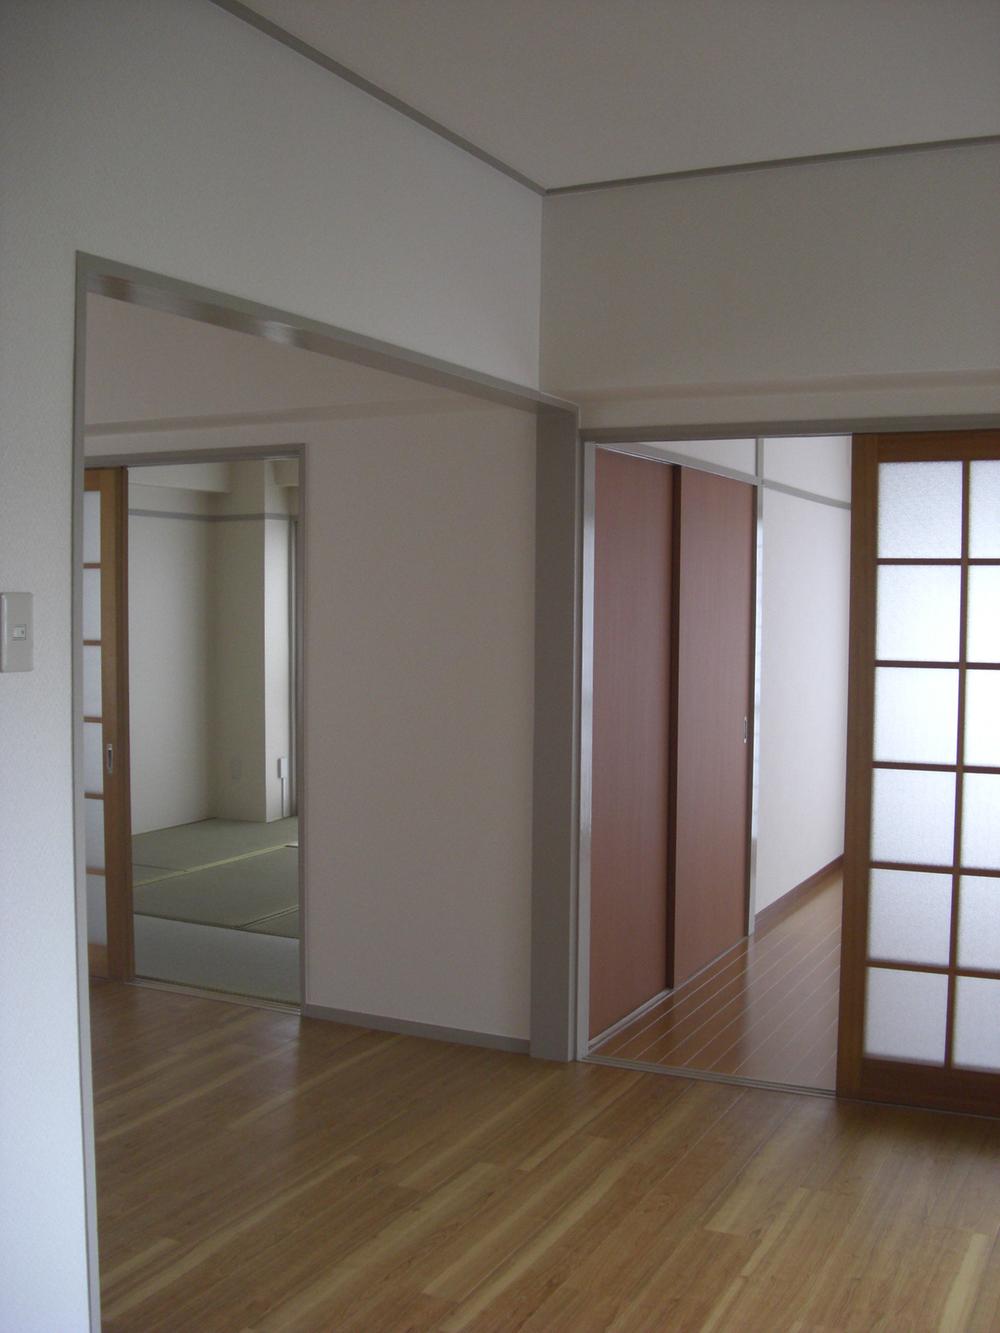 Non-living room. Western-style room from the kitchen ・ Japanese-style quarters (April 2013 shooting)